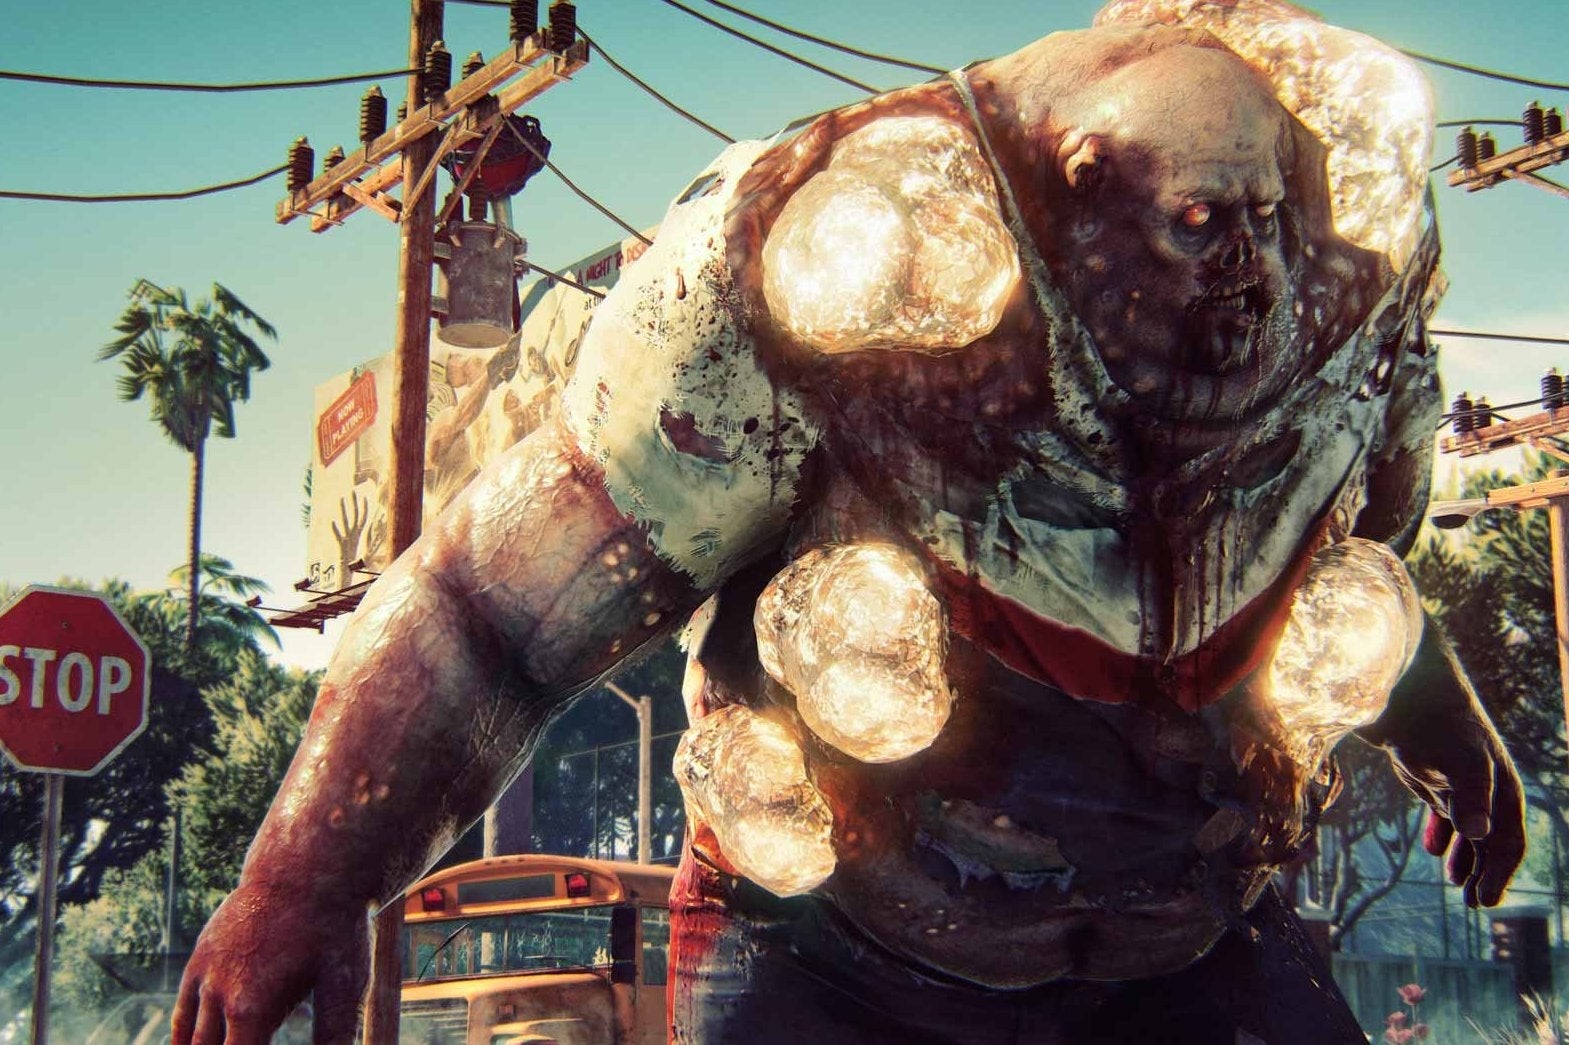 Image for Video: Ten minutes of Dead Island 2 in violent, messy action